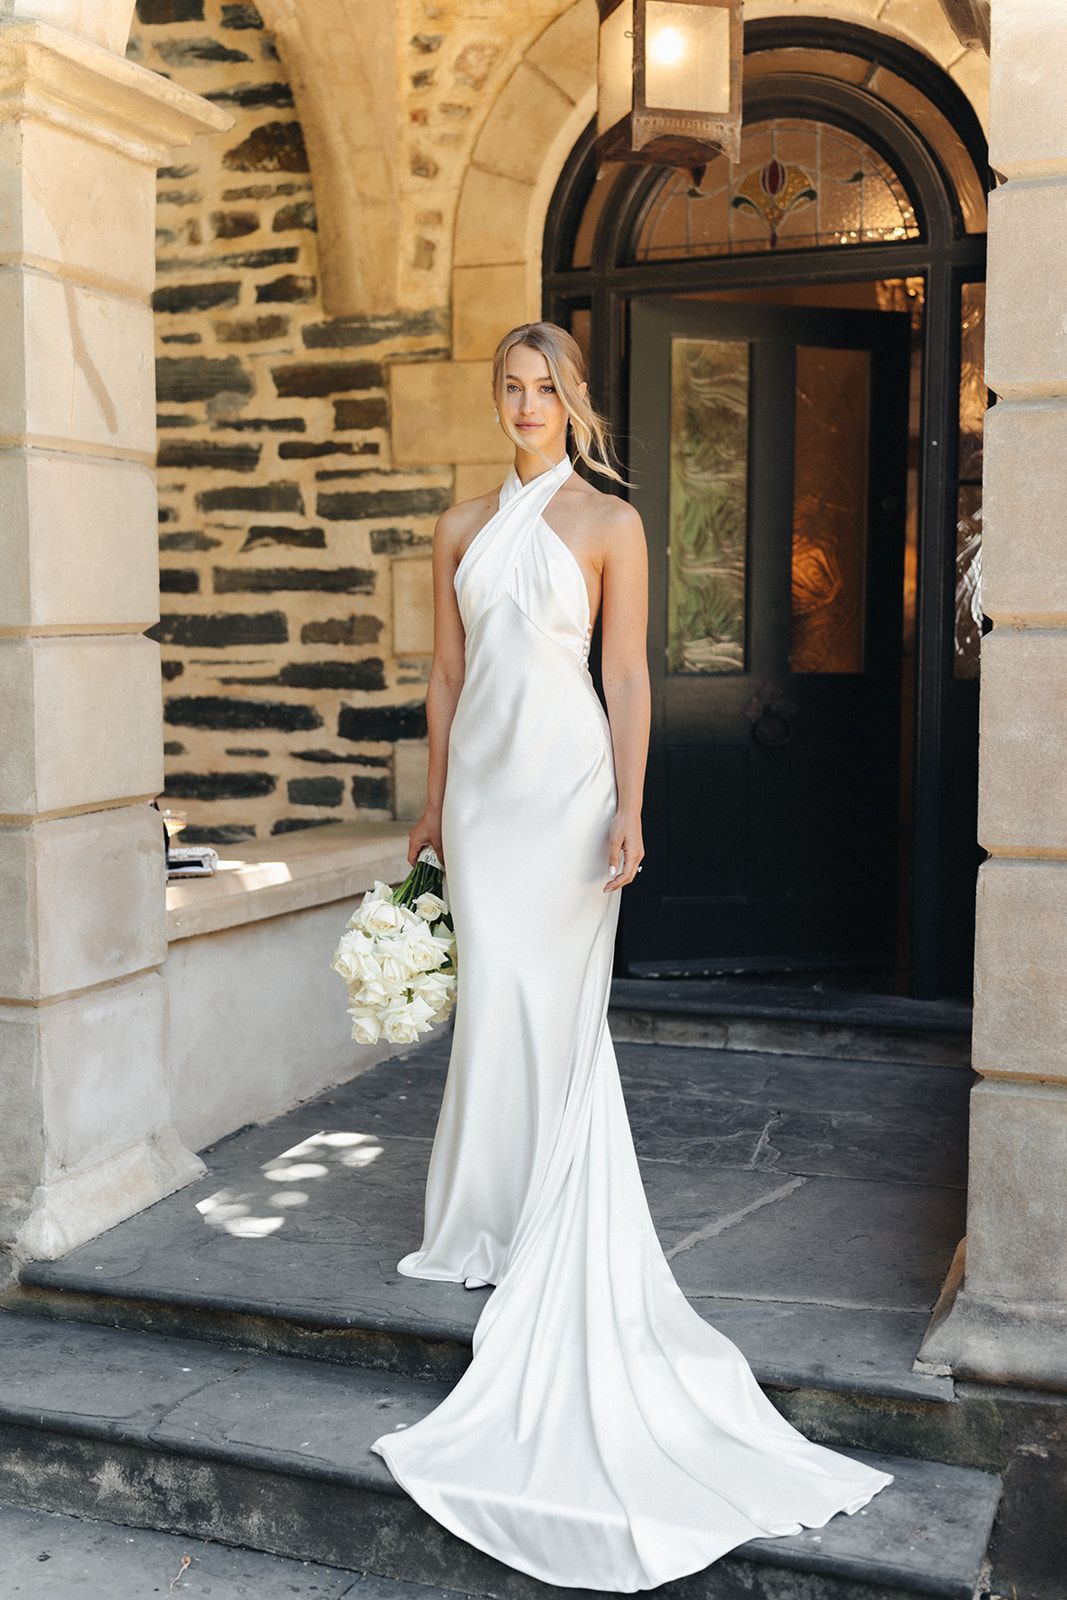 Bride Lilly Katharina at her Melbourne wedding in Custom Chosen by KYHA